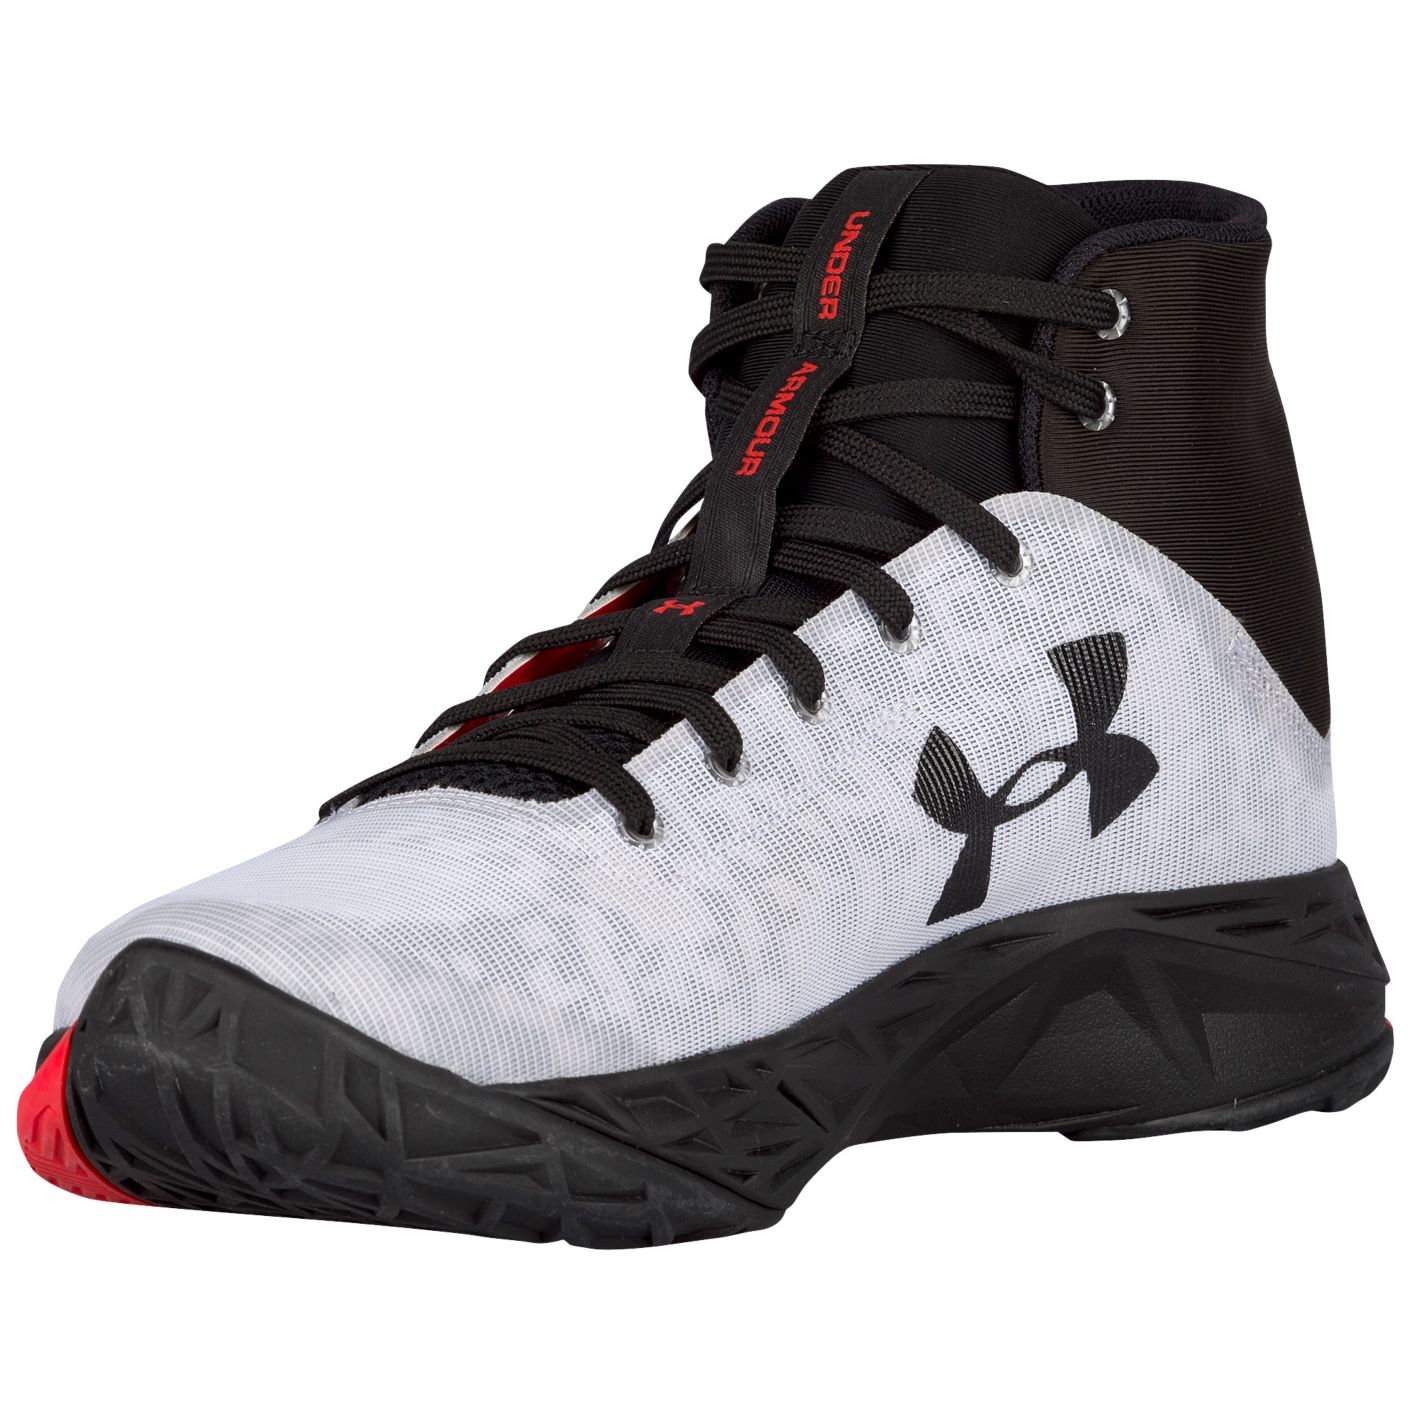 The Under Armour Fire Shot is Available Now 3